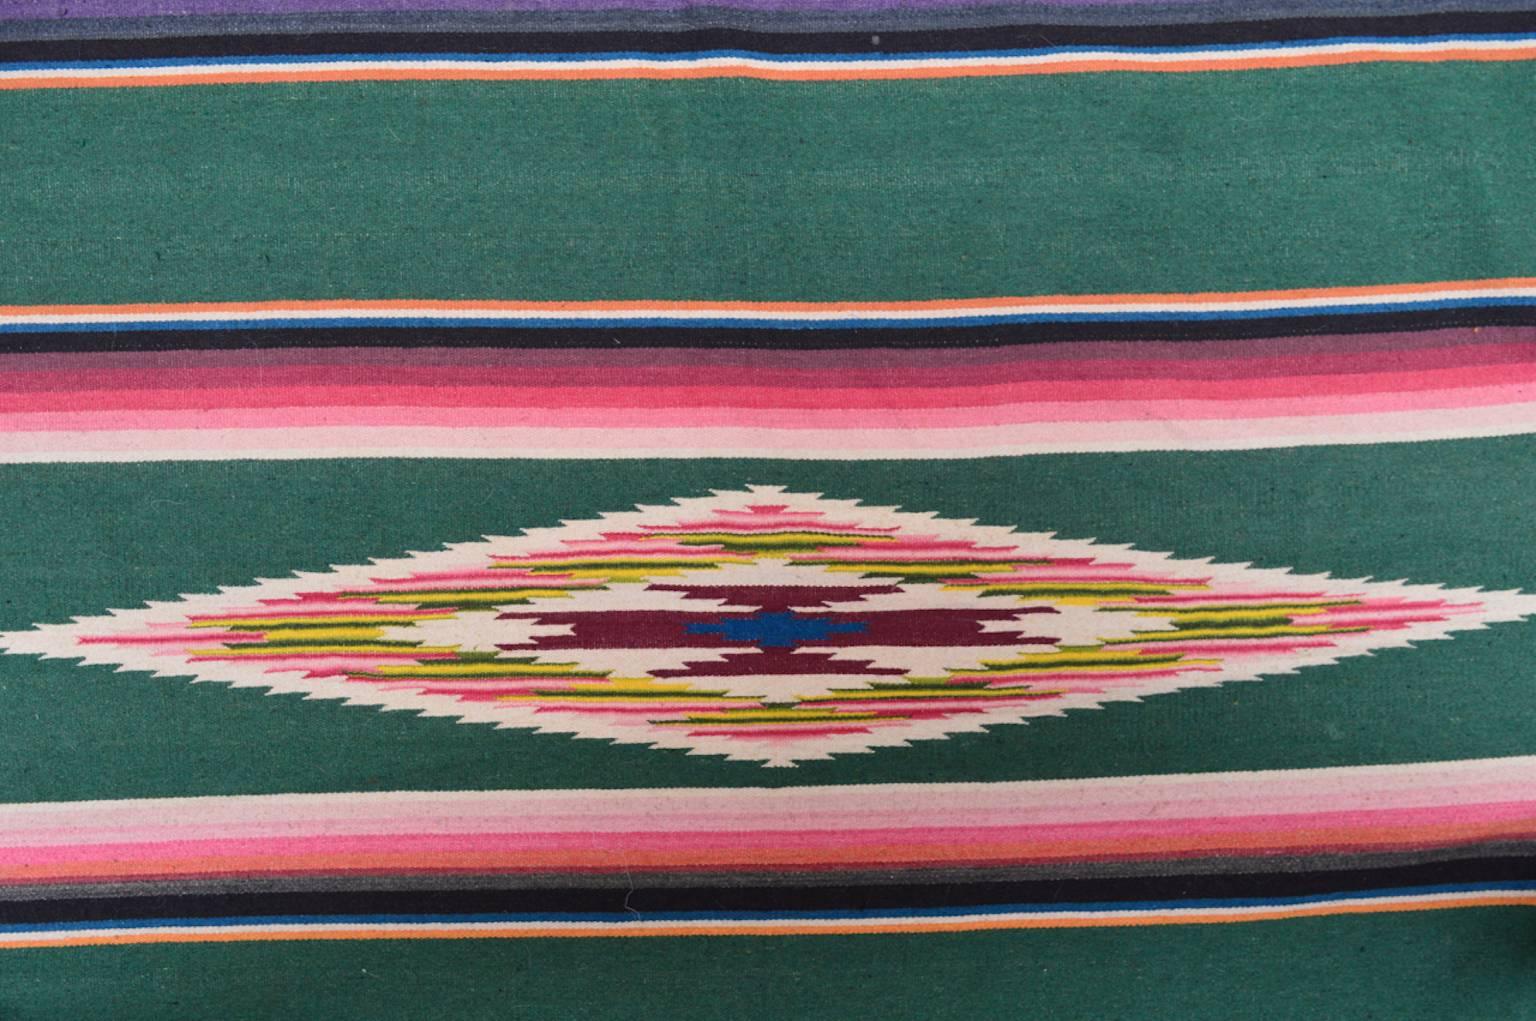 Light weight and very soft wool serape blanket from Saltillo, Mexico, circa 1930.
Handwoven in soft wool on very fine cotton warp threads ended with hand knotted fringe. In excellent condition.
     